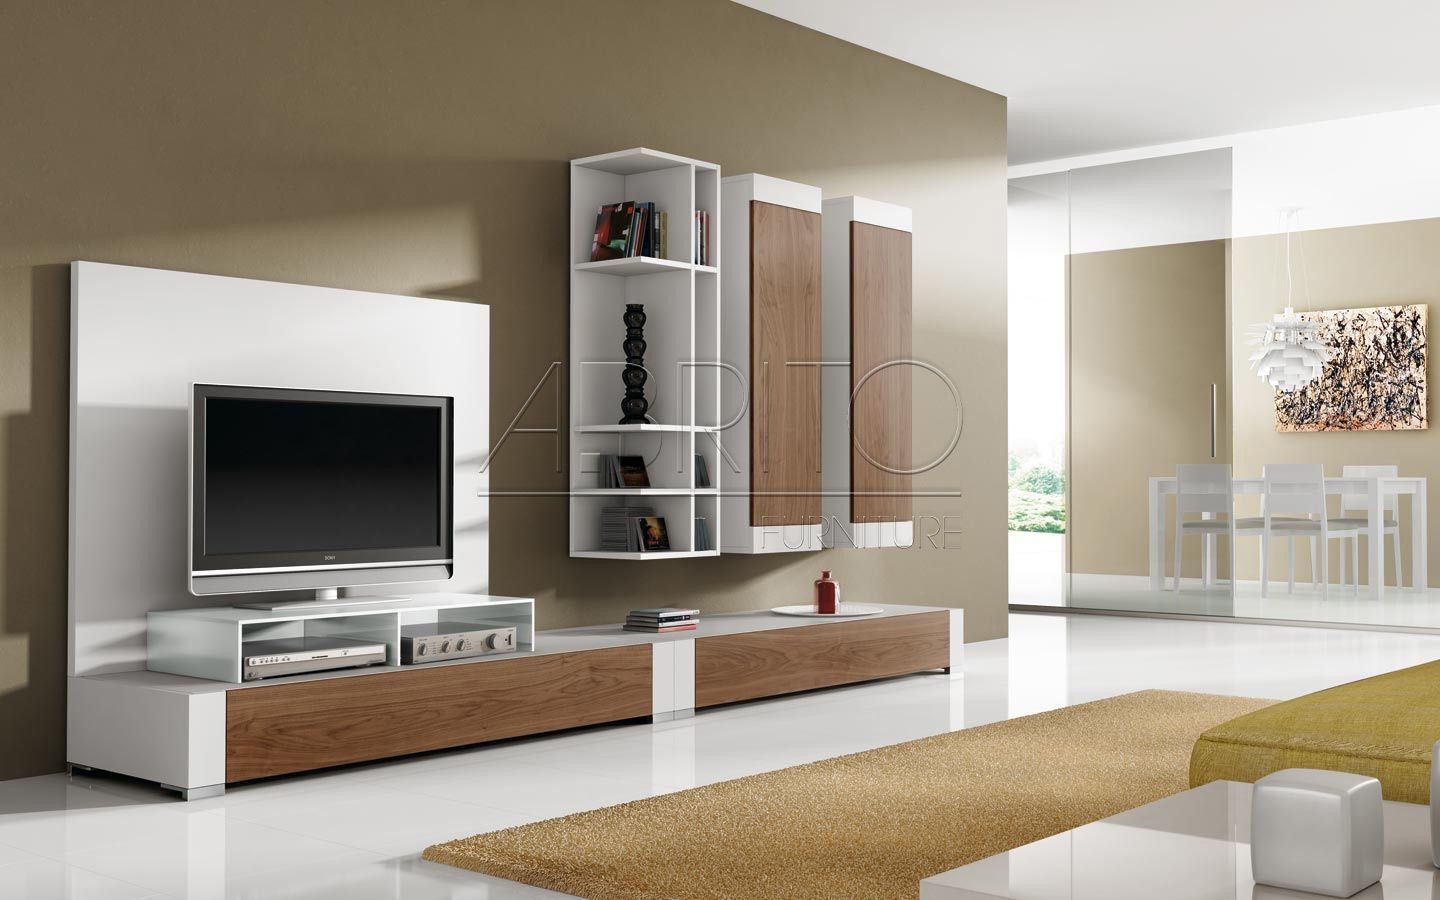 Modern Tv Wall Units Images Spaces Pinterest Tv Units Inside Modern Tv Wall Units (View 5 of 15)